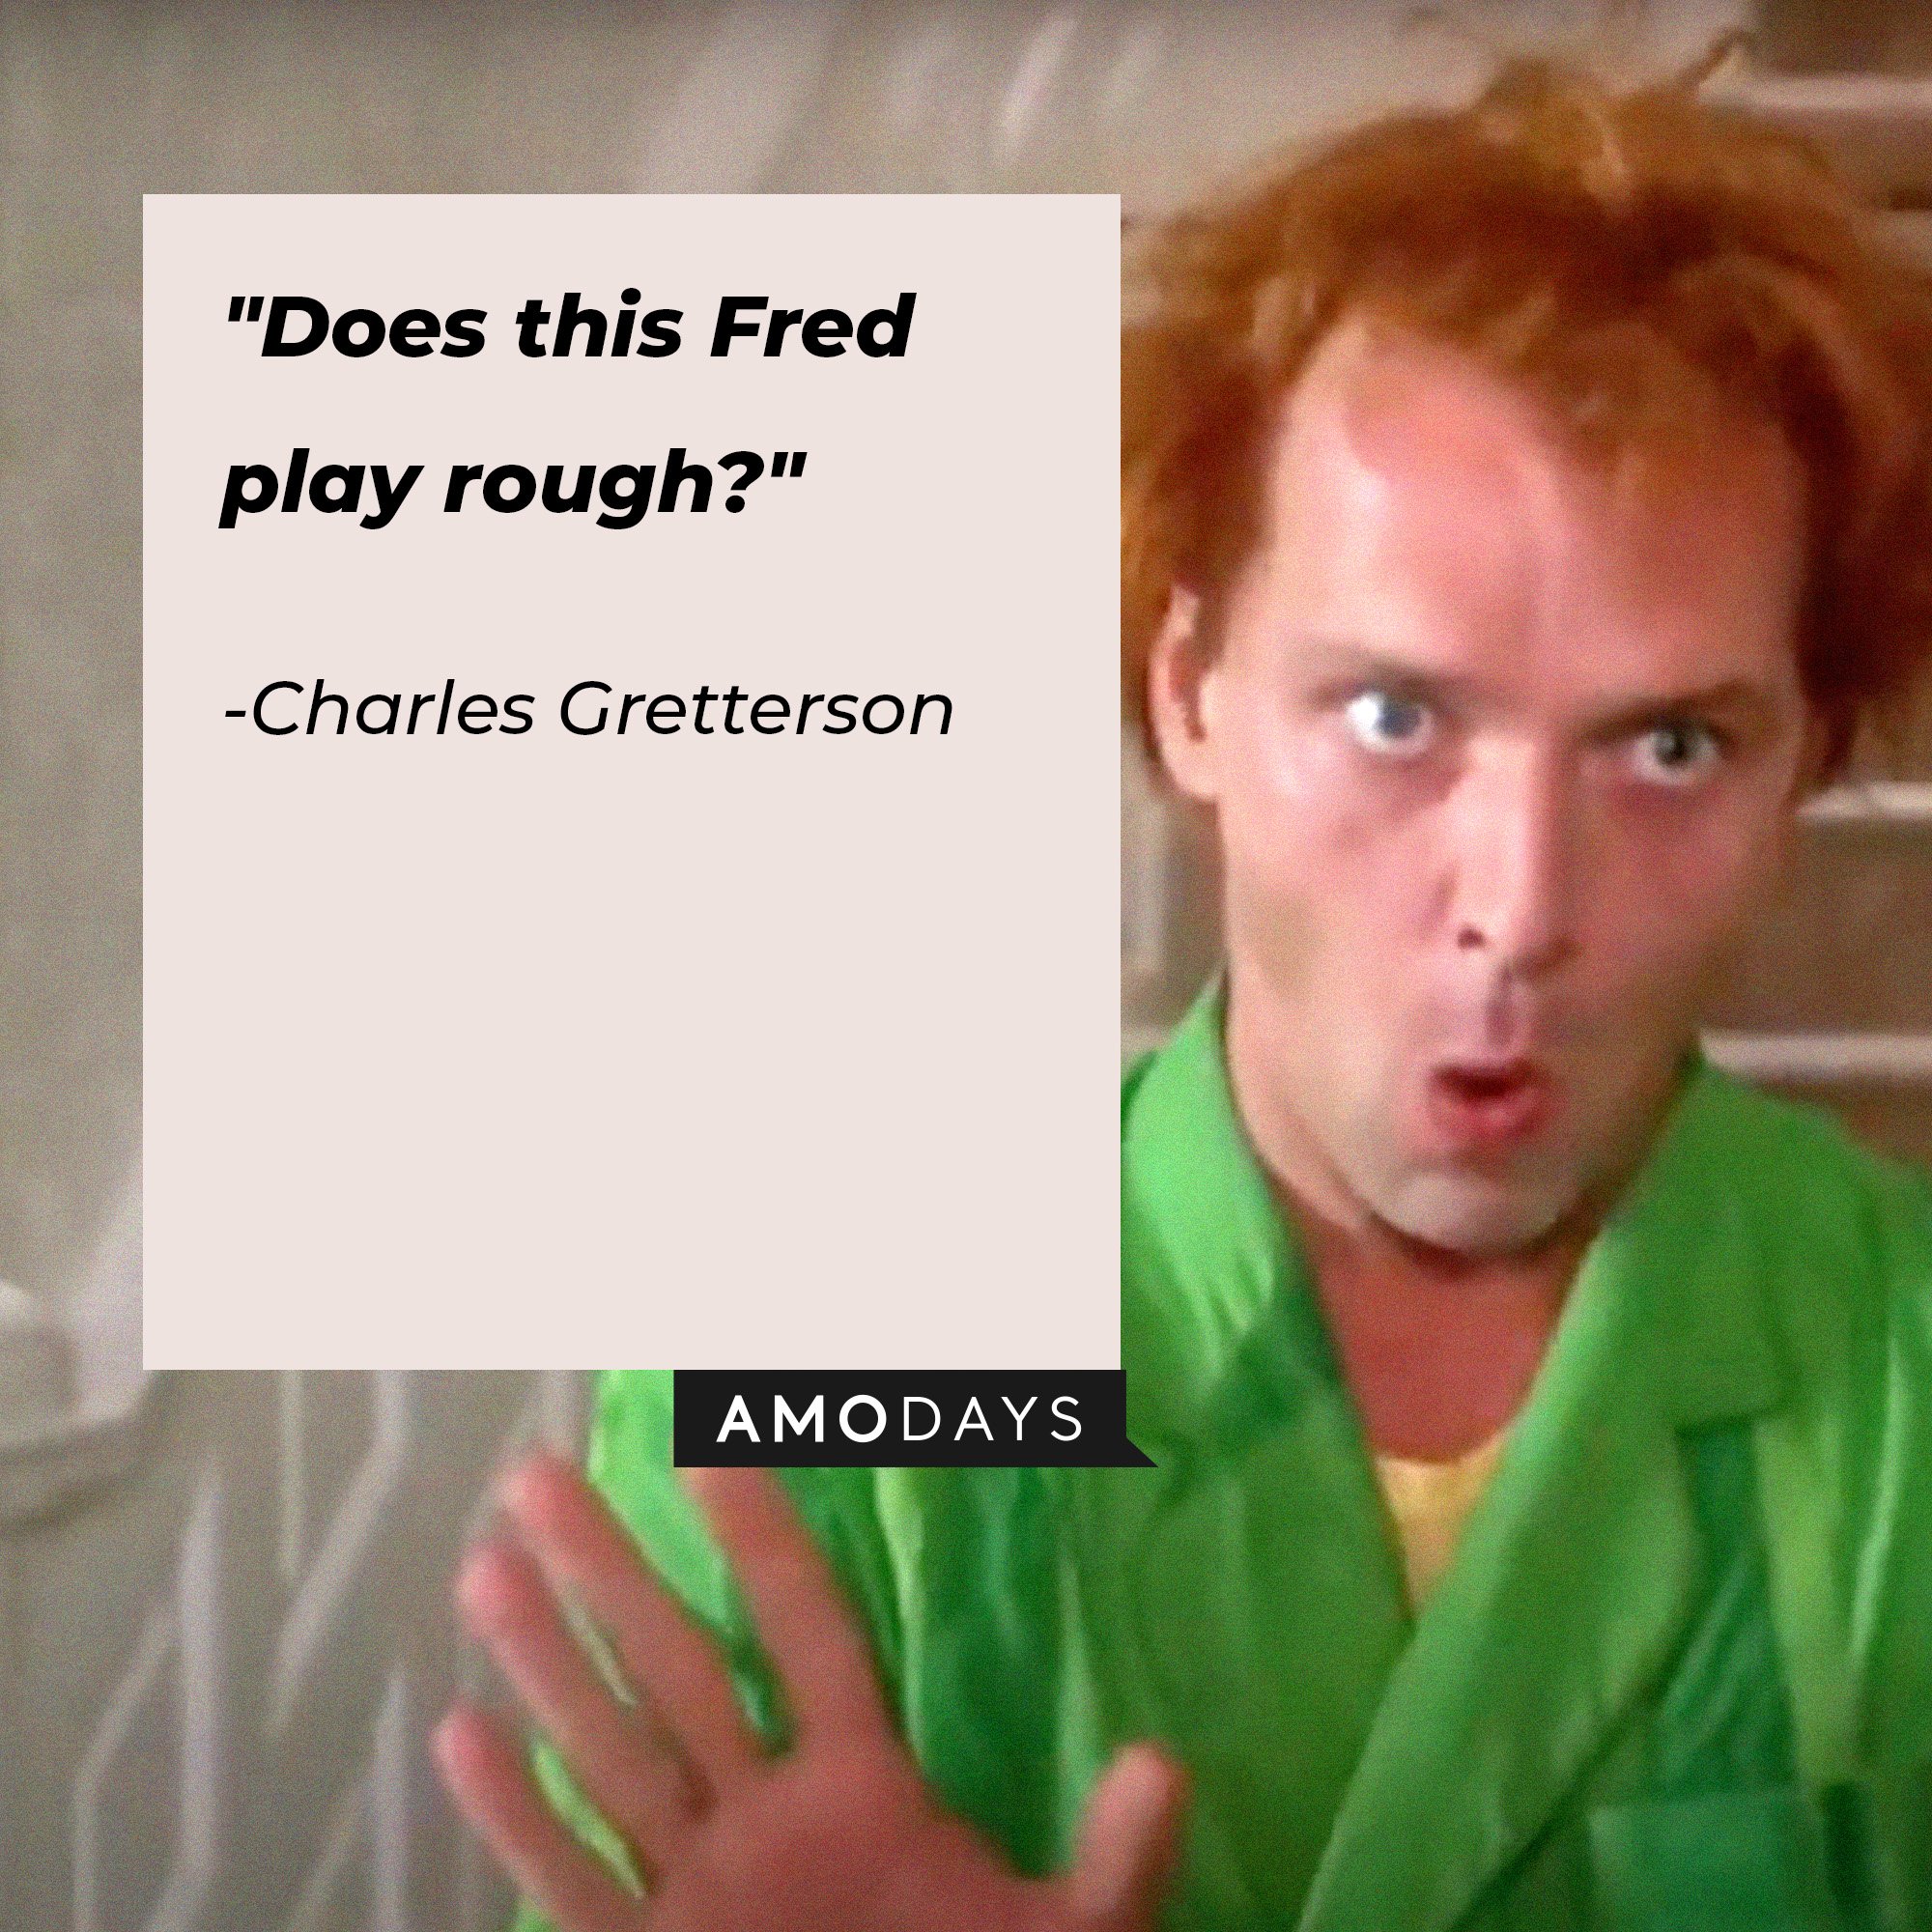 Charles Gretterson’s quote: "Does this Fred play rough?" | Image: AmoDays